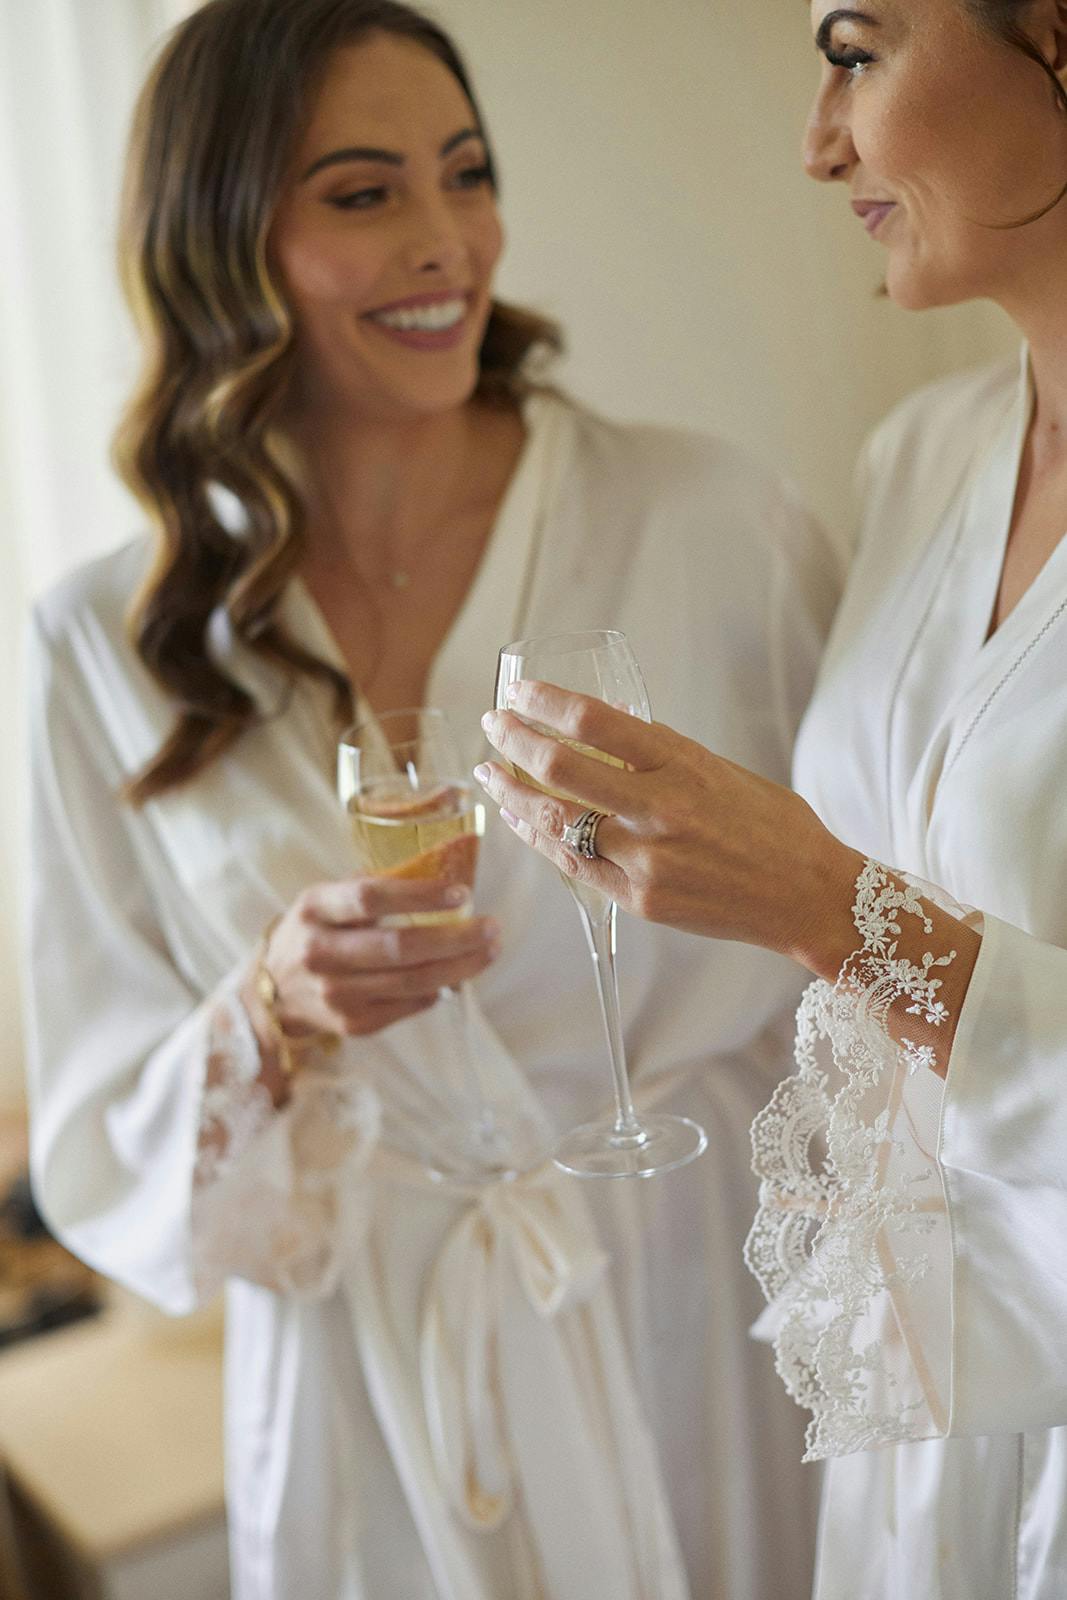 Bride and bridesmaid holding champagne glass